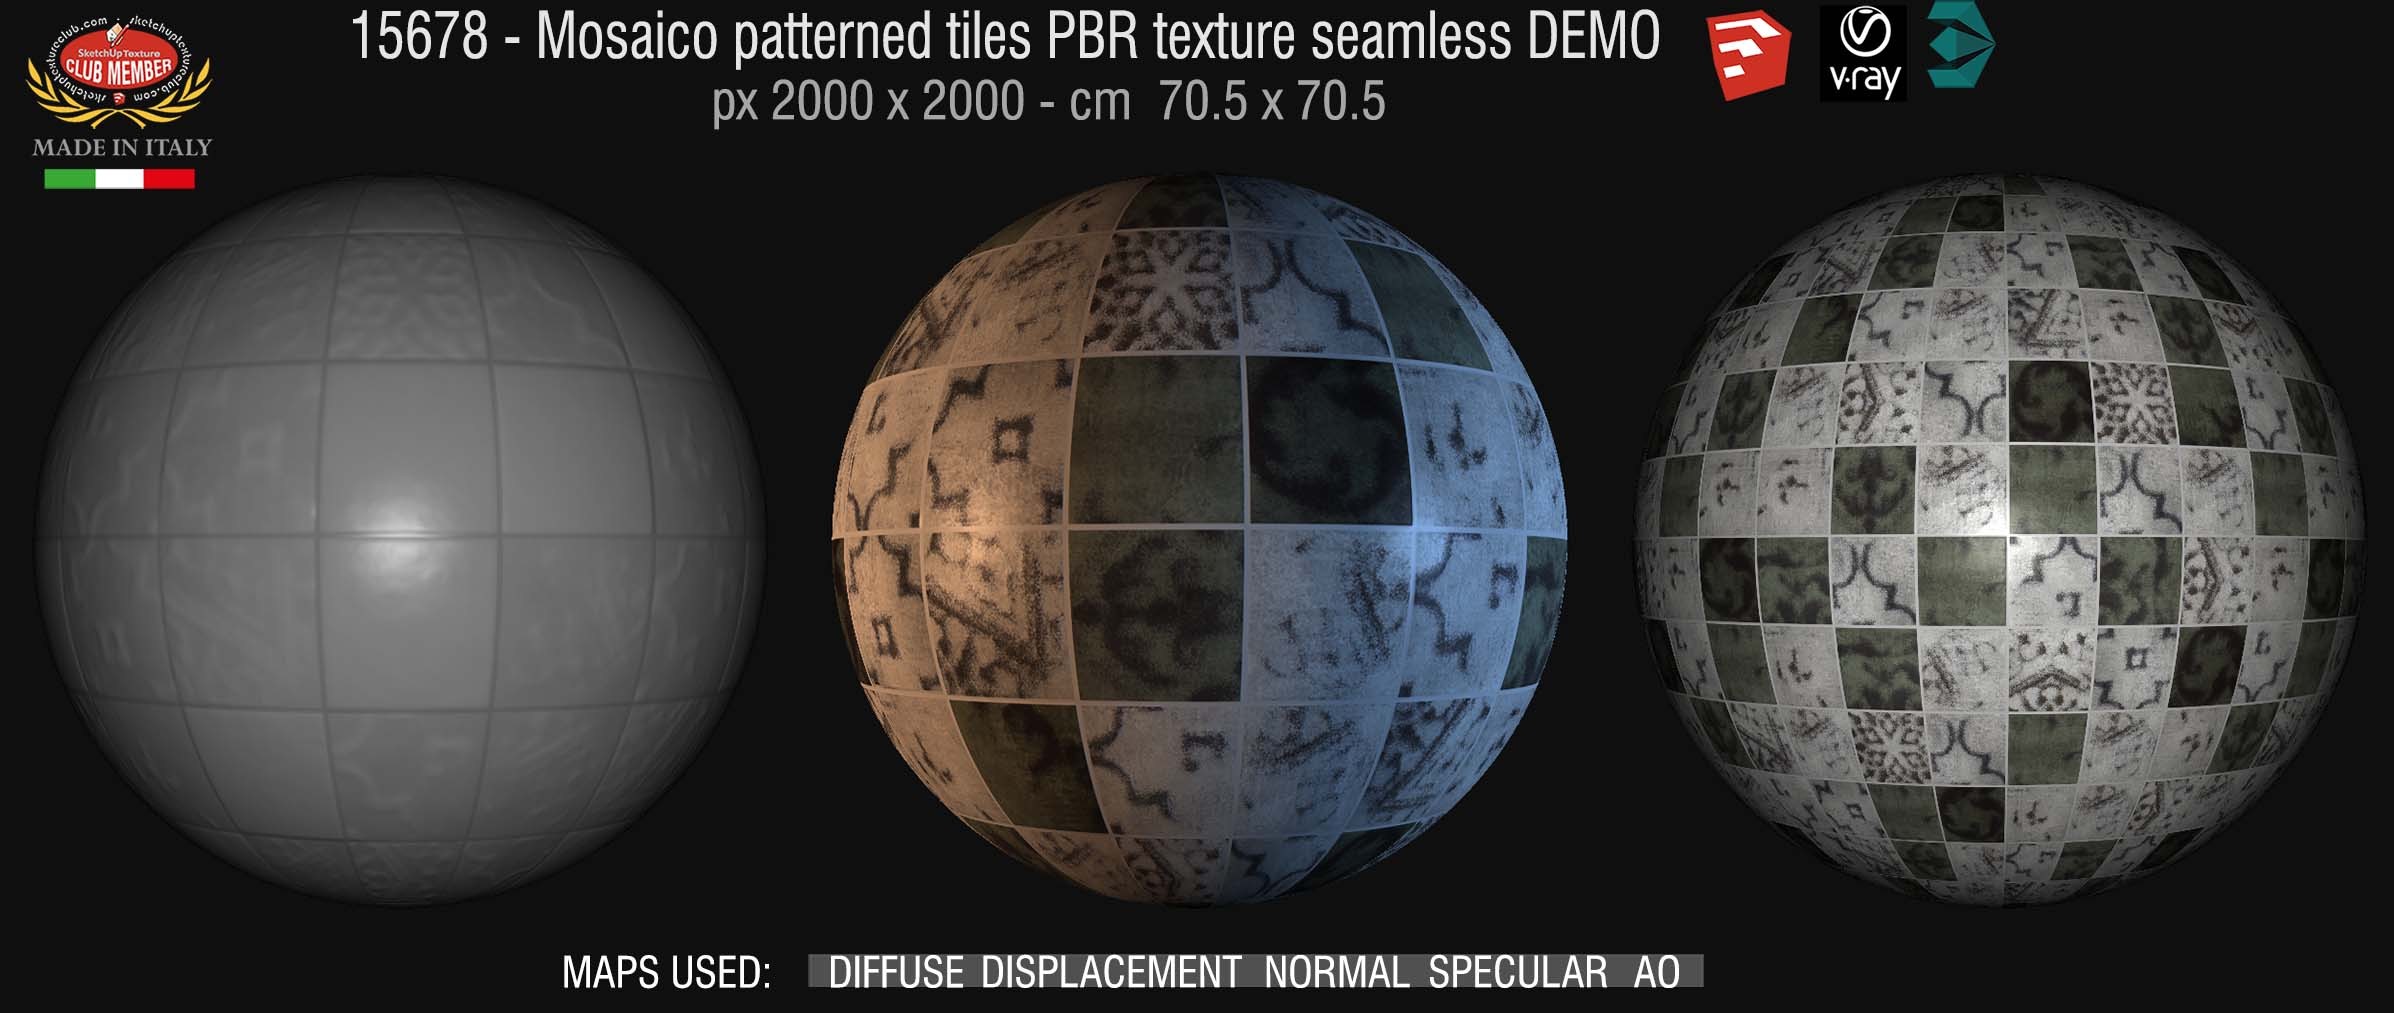 15678 Mosaico patterned tiles PBR texture seamless